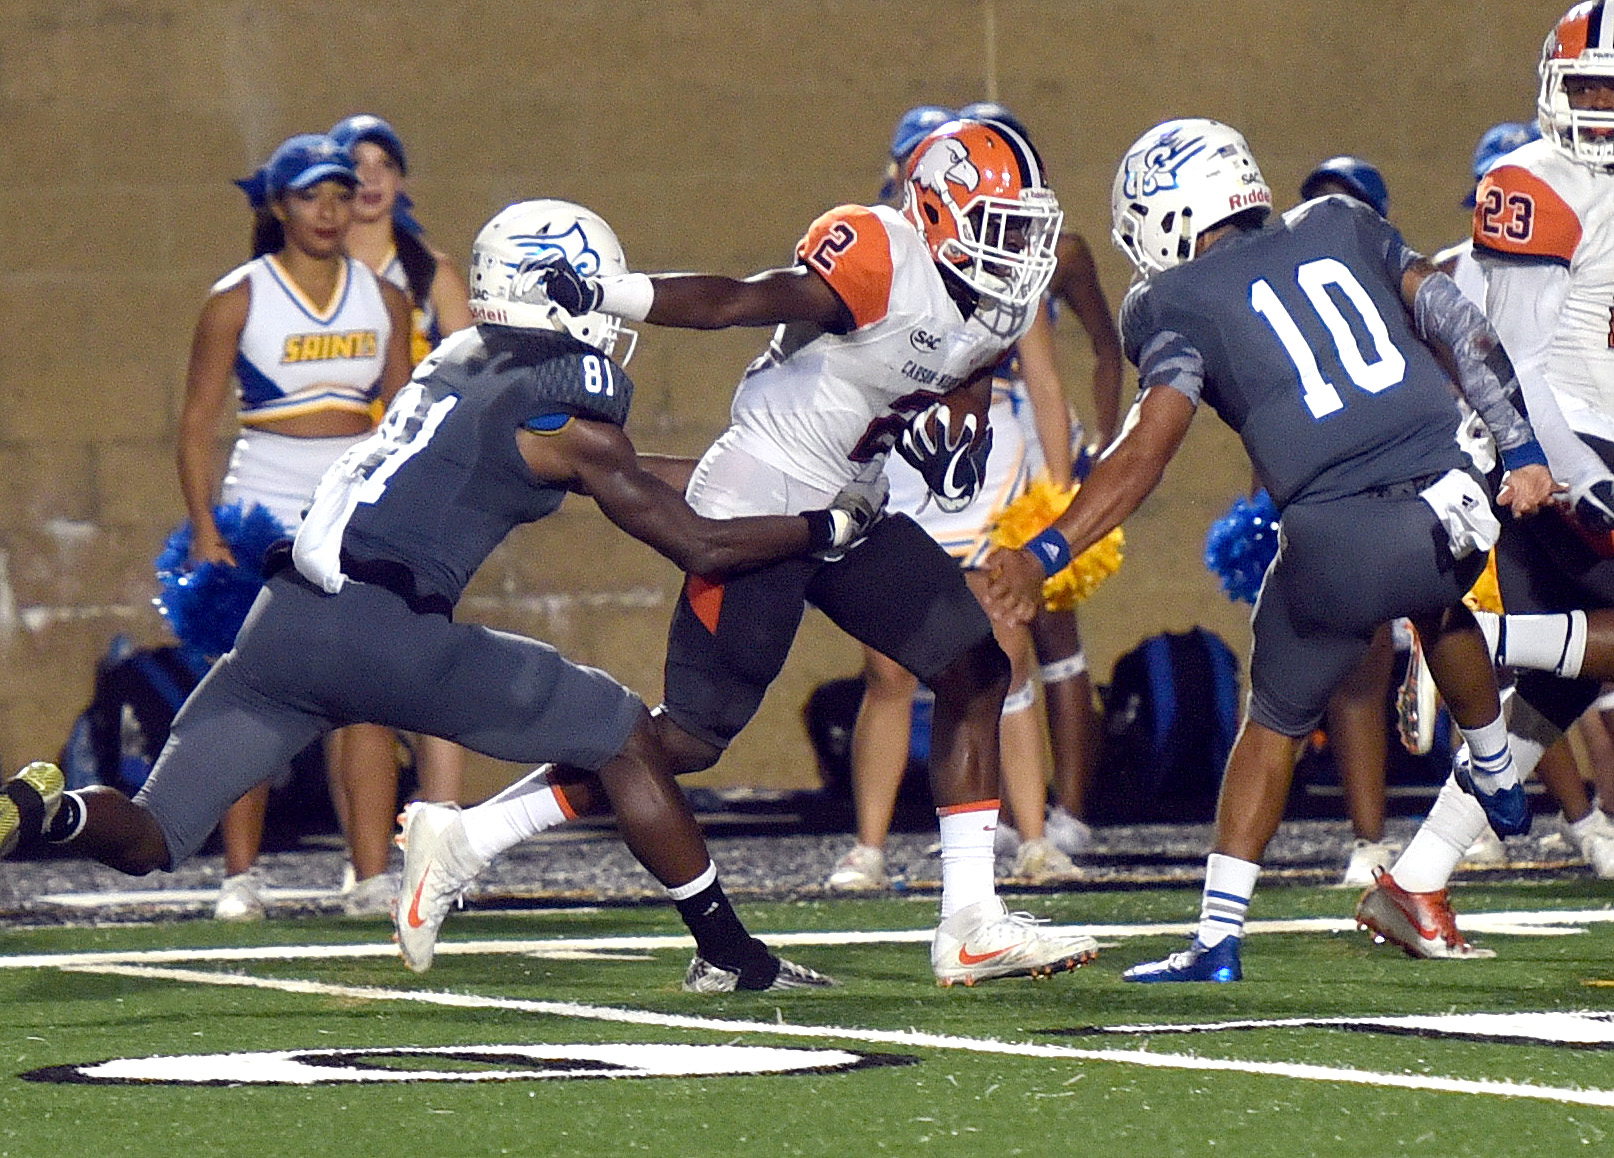 Three second-half turnovers propel Eagles to 31-20 win at Limestone